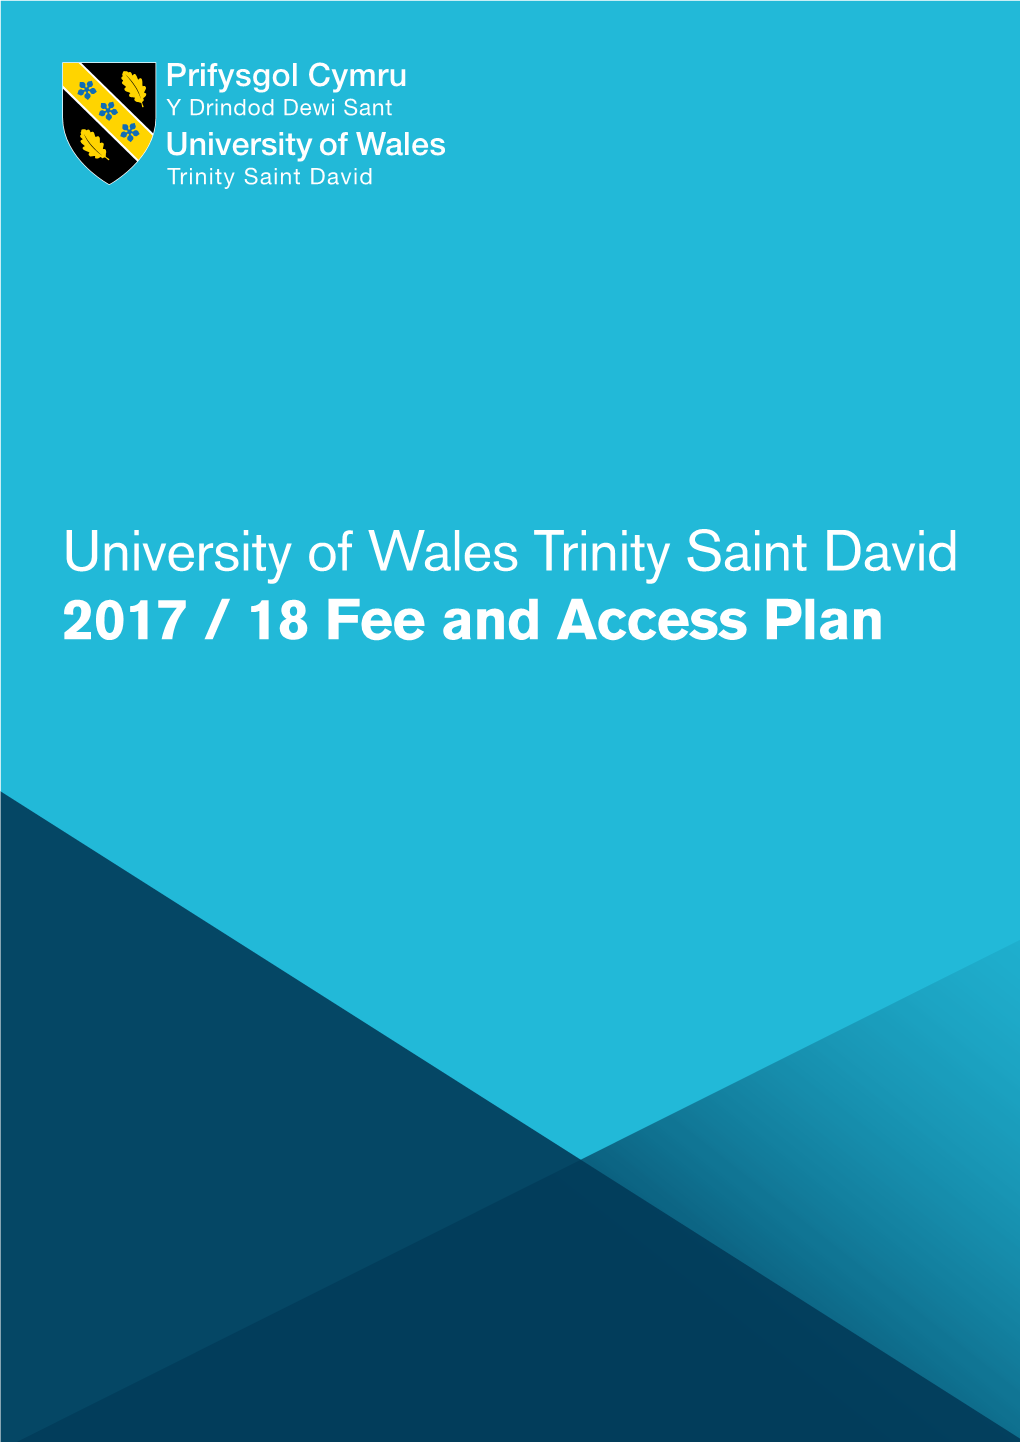 University of Wales Trinity Saint David 2017 / 18 Fee and Access Plan Contents